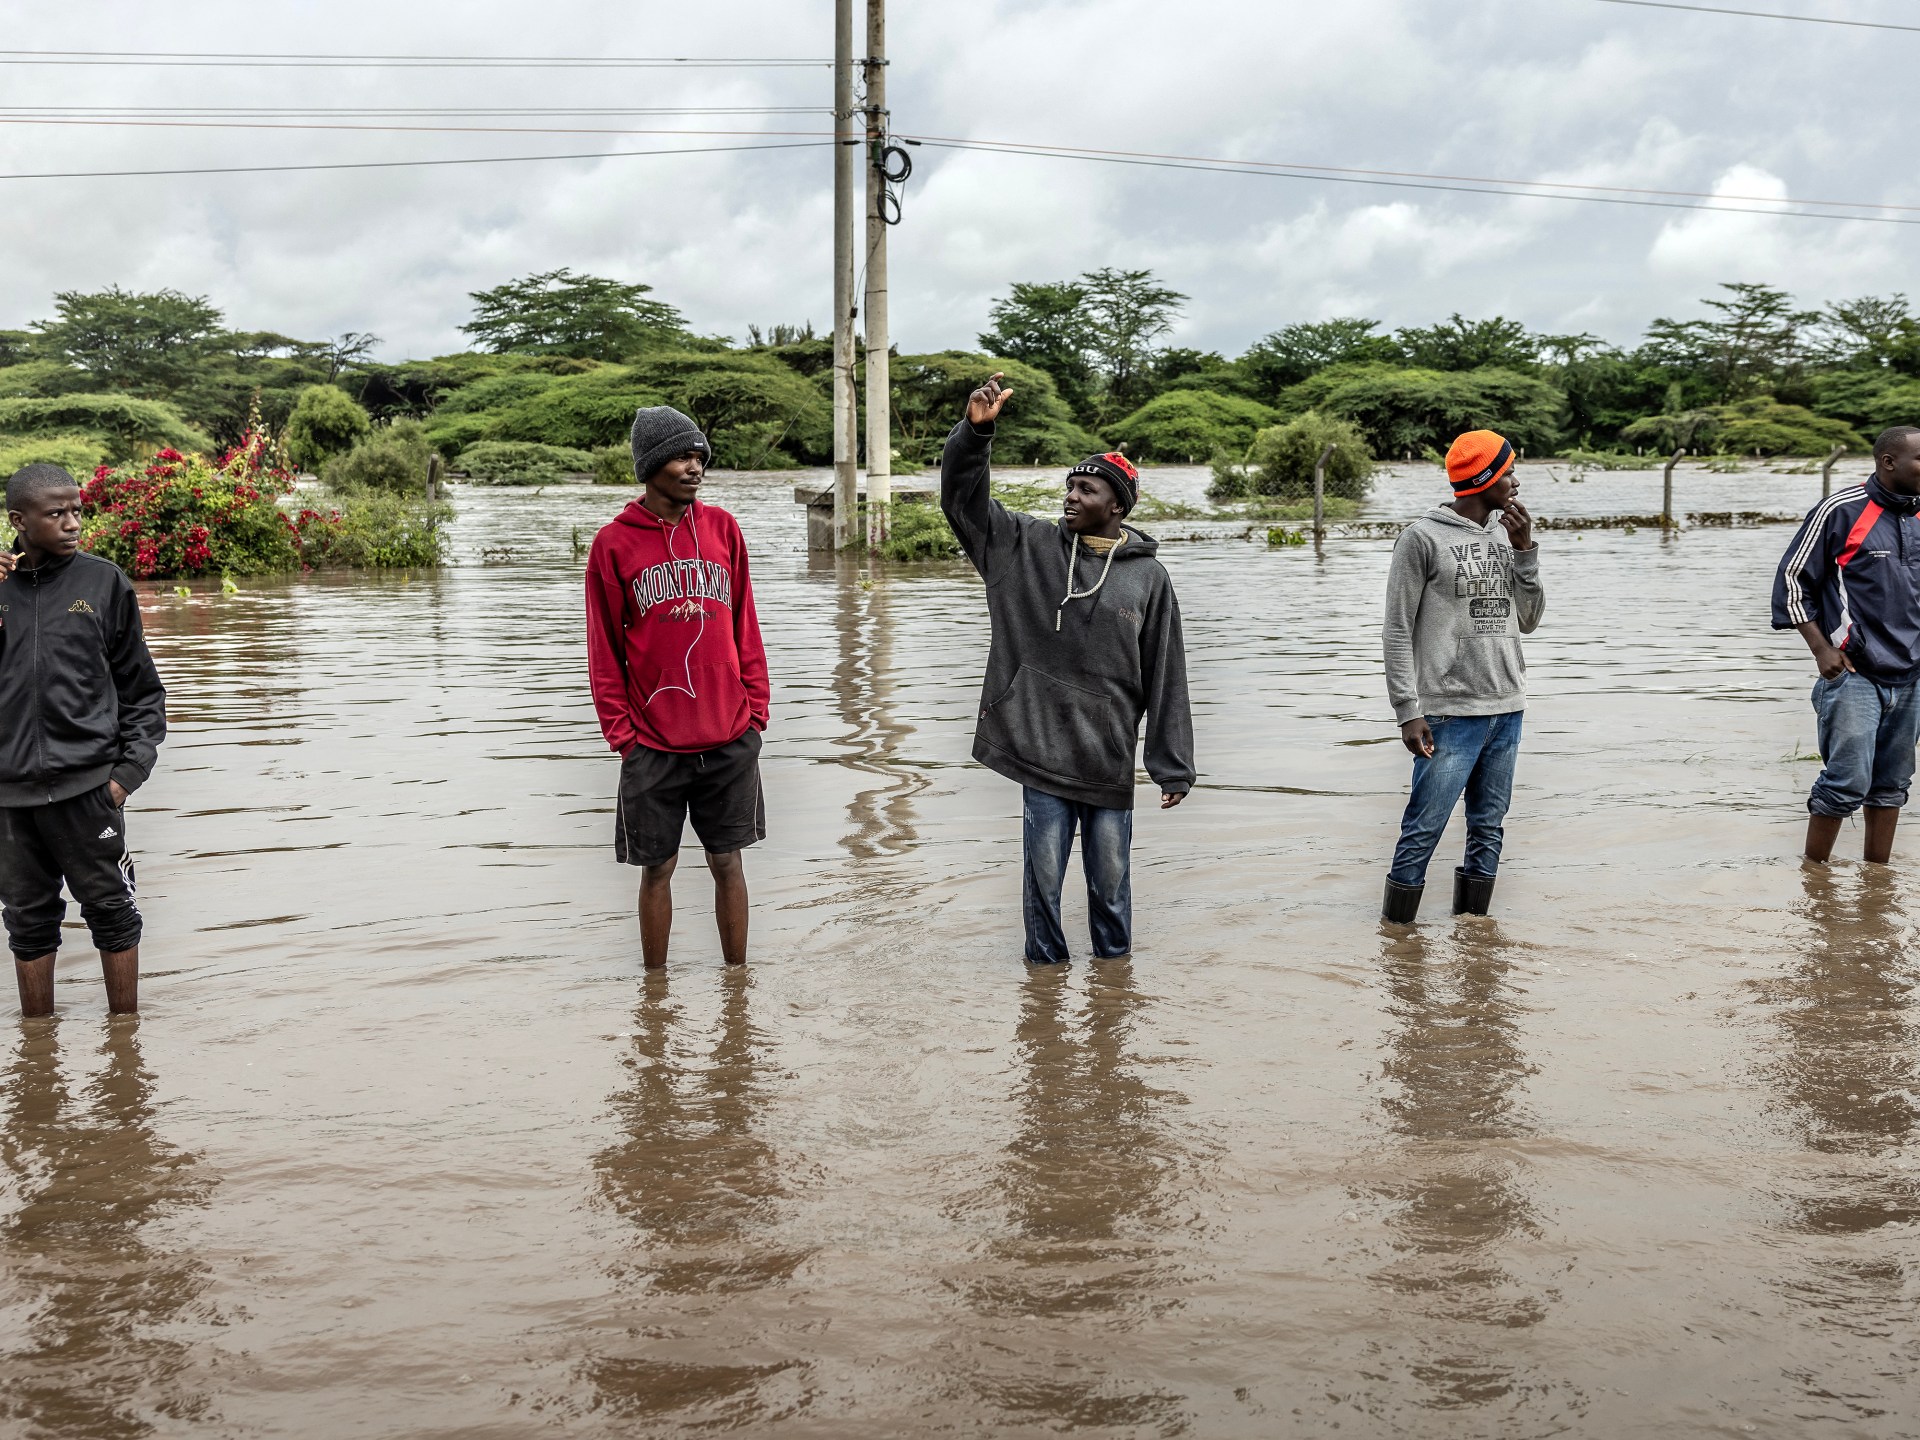 Why has the flooding in Kenya been so devastating?